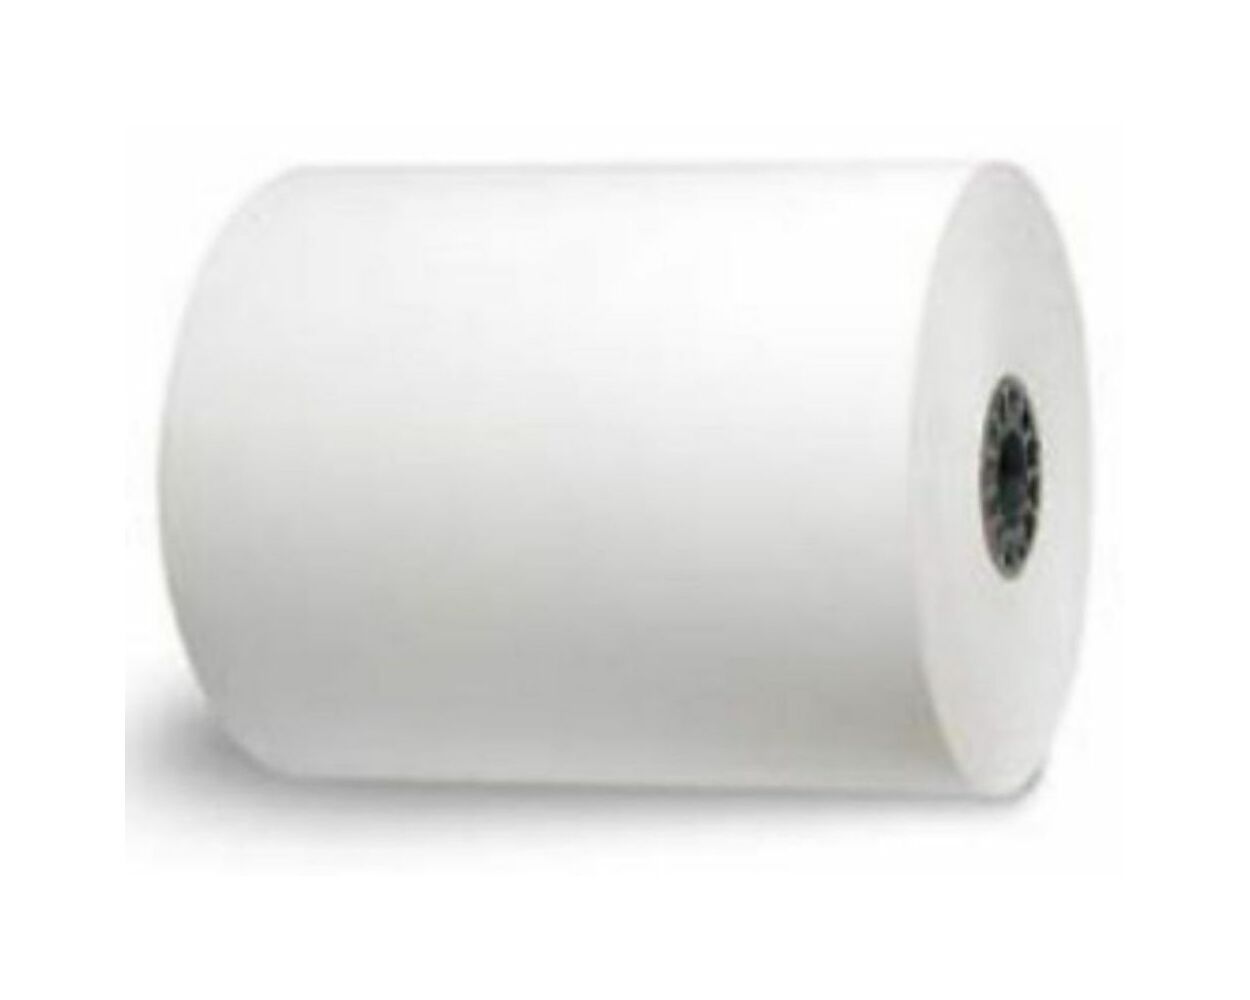 Thermal Paper Rolls Products, Supplies and Equipment